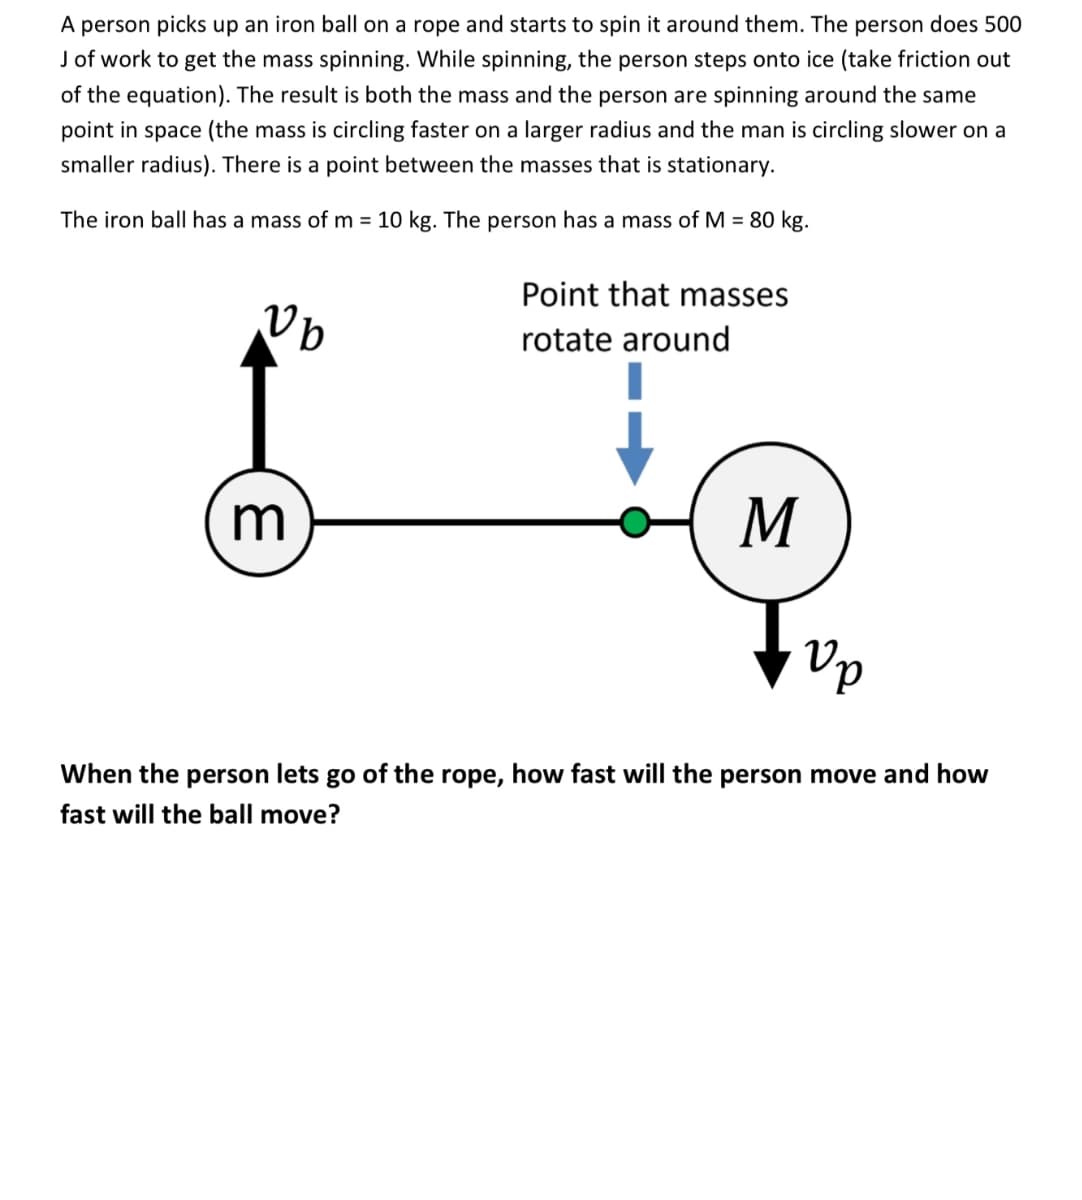 A person picks up an iron ball on a rope and starts to spin it around them. The person does 500
J of work to get the mass spinning. While spinning, the person steps onto ice (take friction out
of the equation). The result is both the mass and the person are spinning around the same
point in space (the mass is circling faster on a larger radius and the man is circling slower on a
smaller radius). There is a point between the masses that is stationary.
The iron ball has a mass of m = 10 kg. The person has a mass of M = 80 kg.
Vb
Point that masses
rotate around
3
M
ор
When the person lets go of the rope, how fast will the person move and how
fast will the ball move?